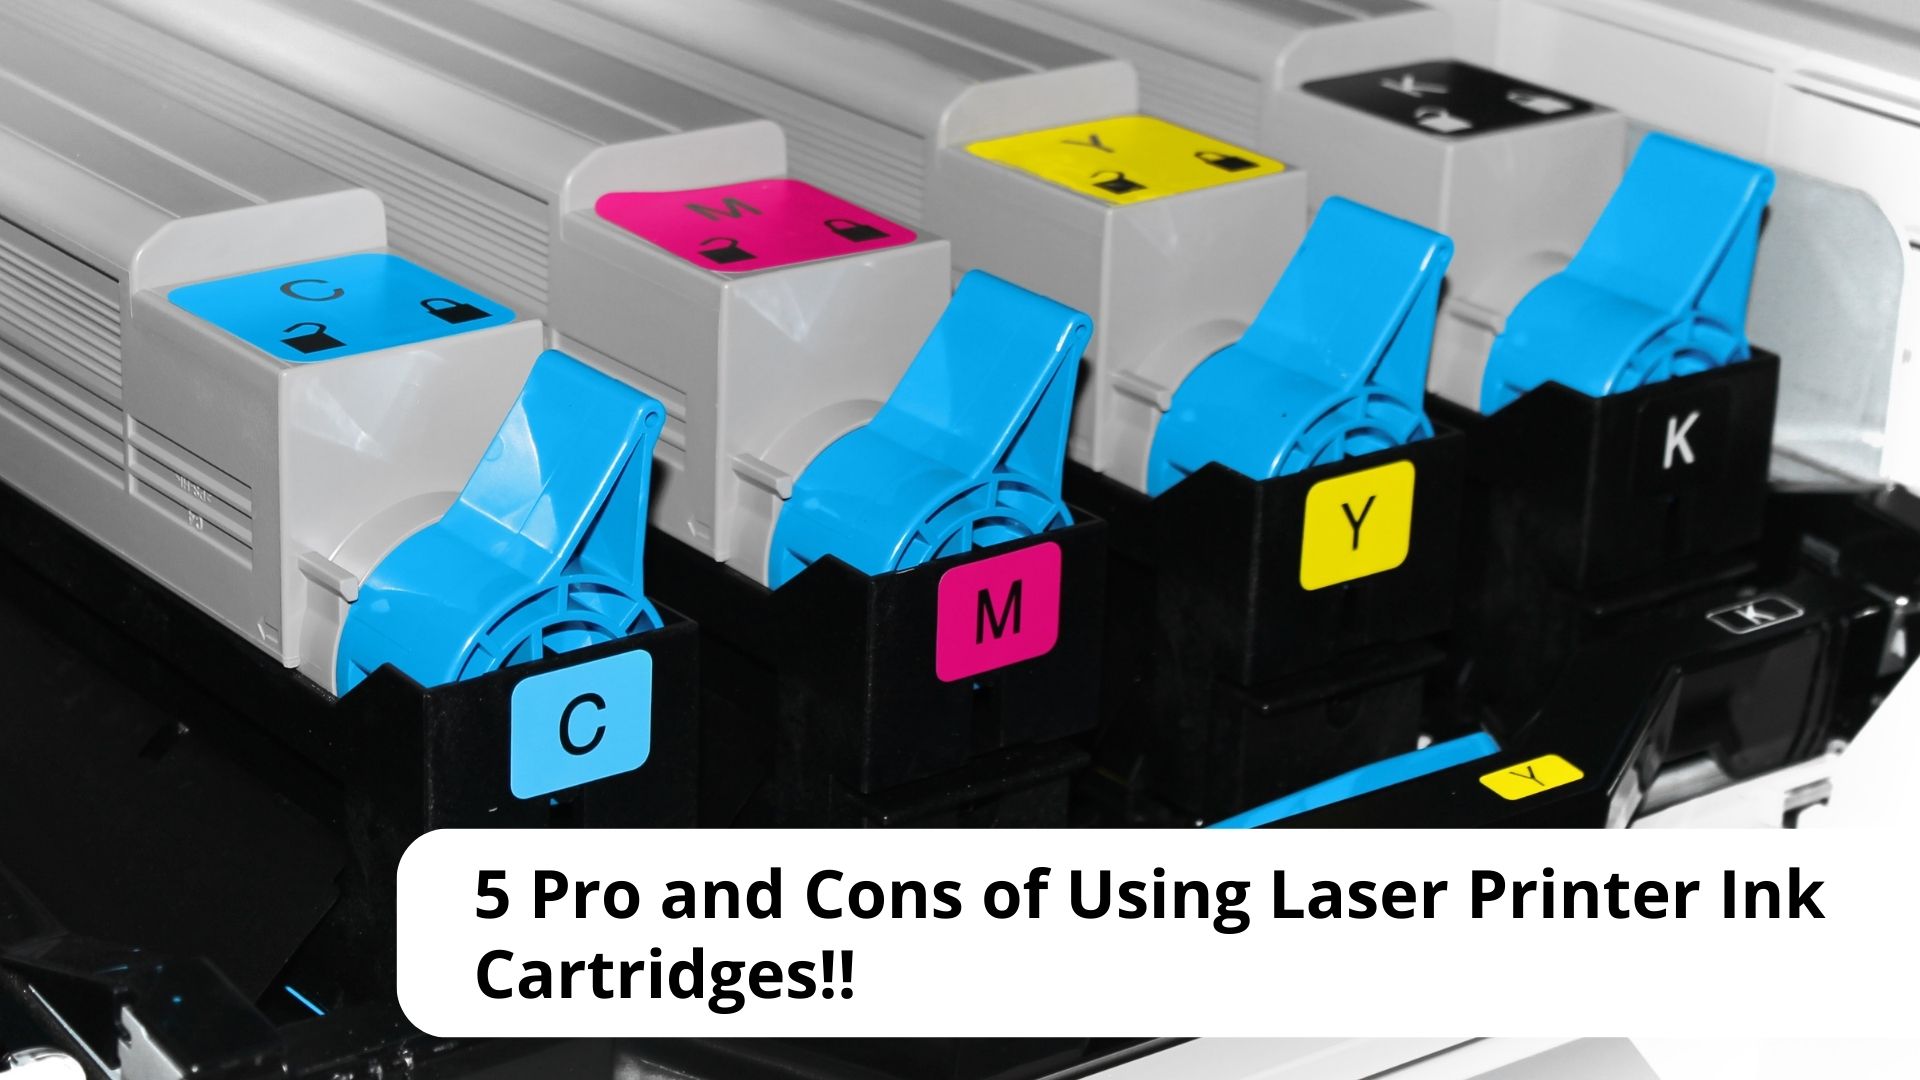 5 Pro and Cons of Using Laser Printer Ink Cartridges